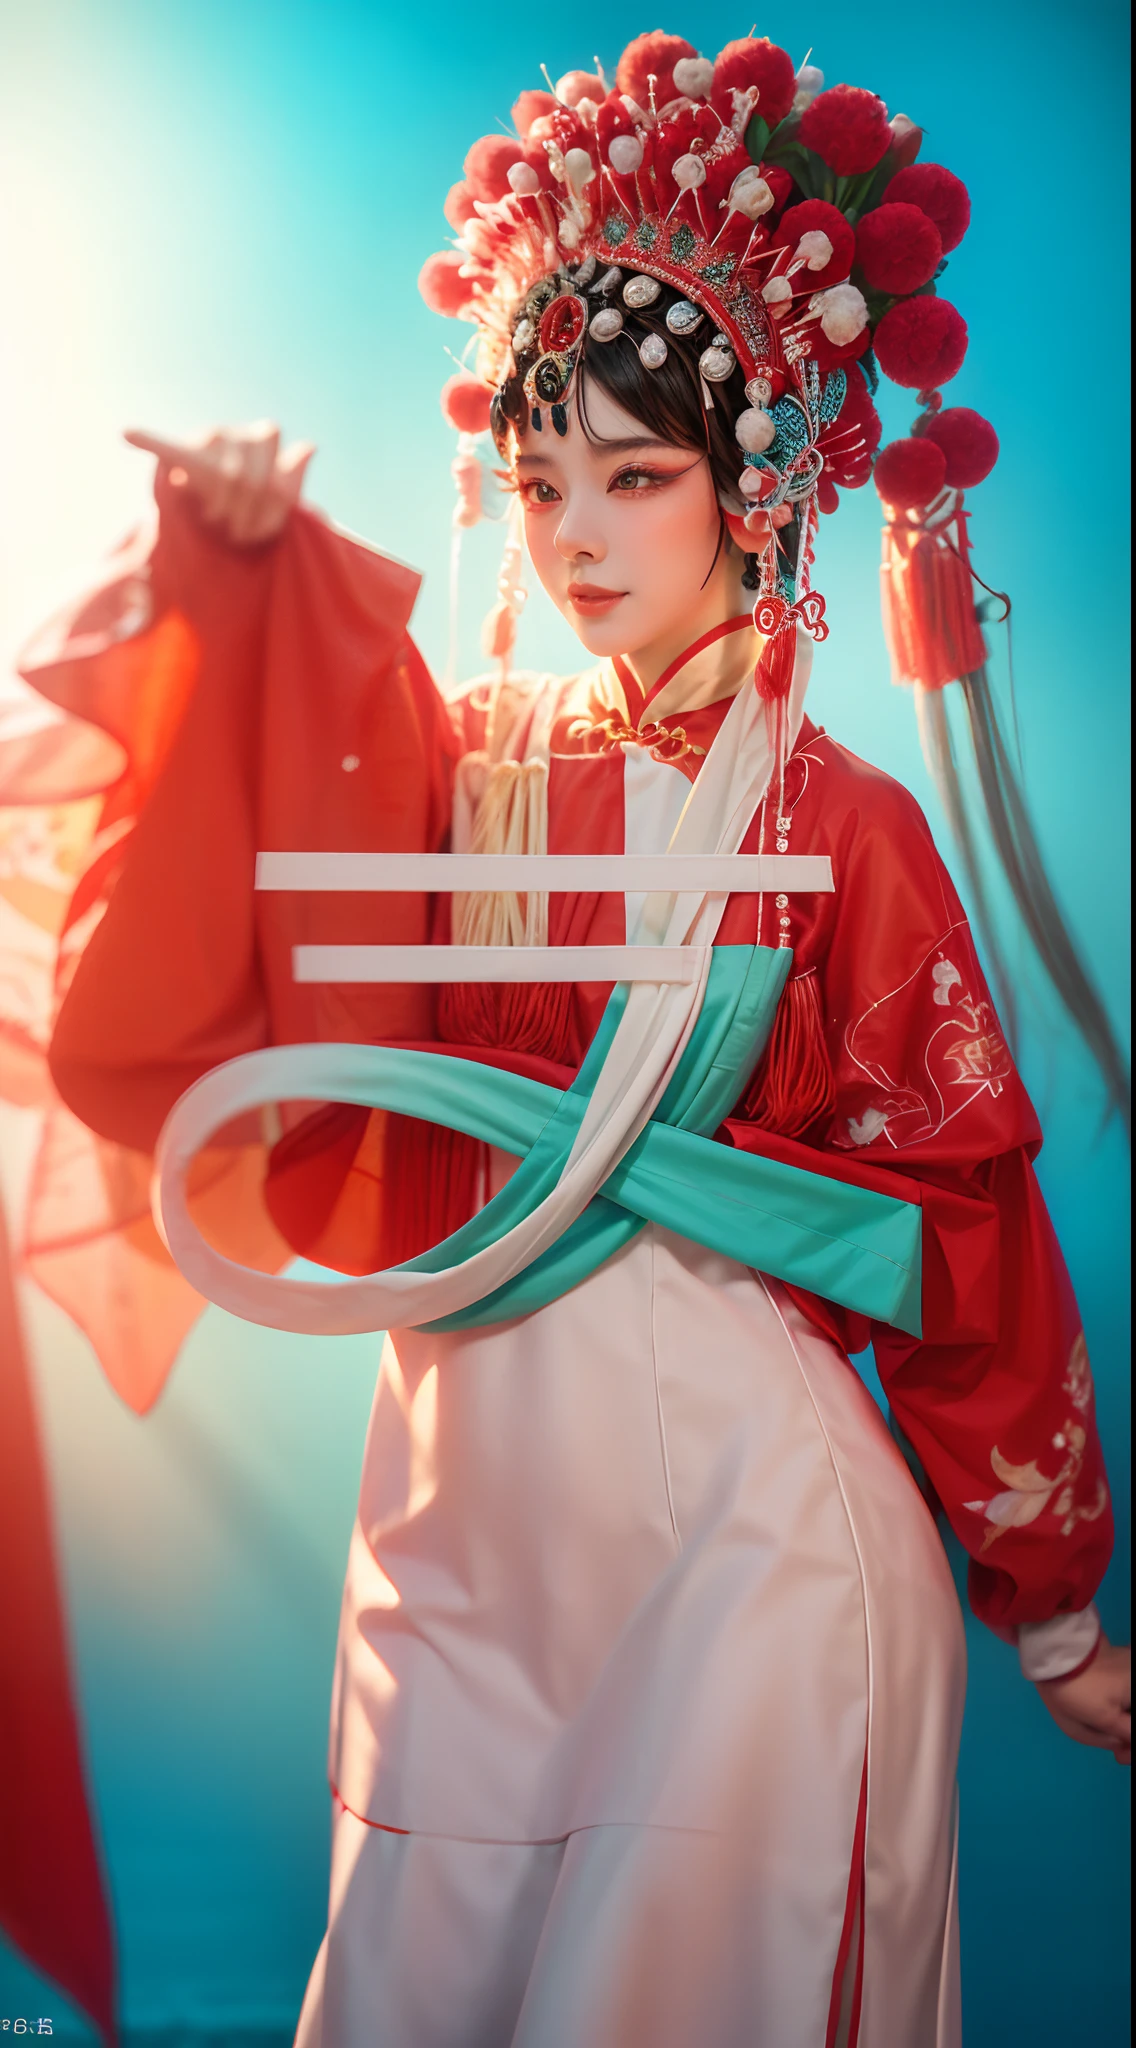 Resolution and quality: 8K, Top quality, Realistic, Medium photography, Grain photos Photography style and effects: Dynamic action, Pale and faded style, Dreamy nostalgia, Soft focus, Vignetting, Blue and white Peking Opera costumes, Chinese opera, Peking Opera costumes, Red pom-pom tiara scene and background: Loft interior background, Green waves, Red and white color scheme Motivation and mood: Magnificent, Majestic momentum, The happy expression of the character, Crazy and complex technology and details: Ultra-fine engraving, Microphotography techniques, The ultra-realistice